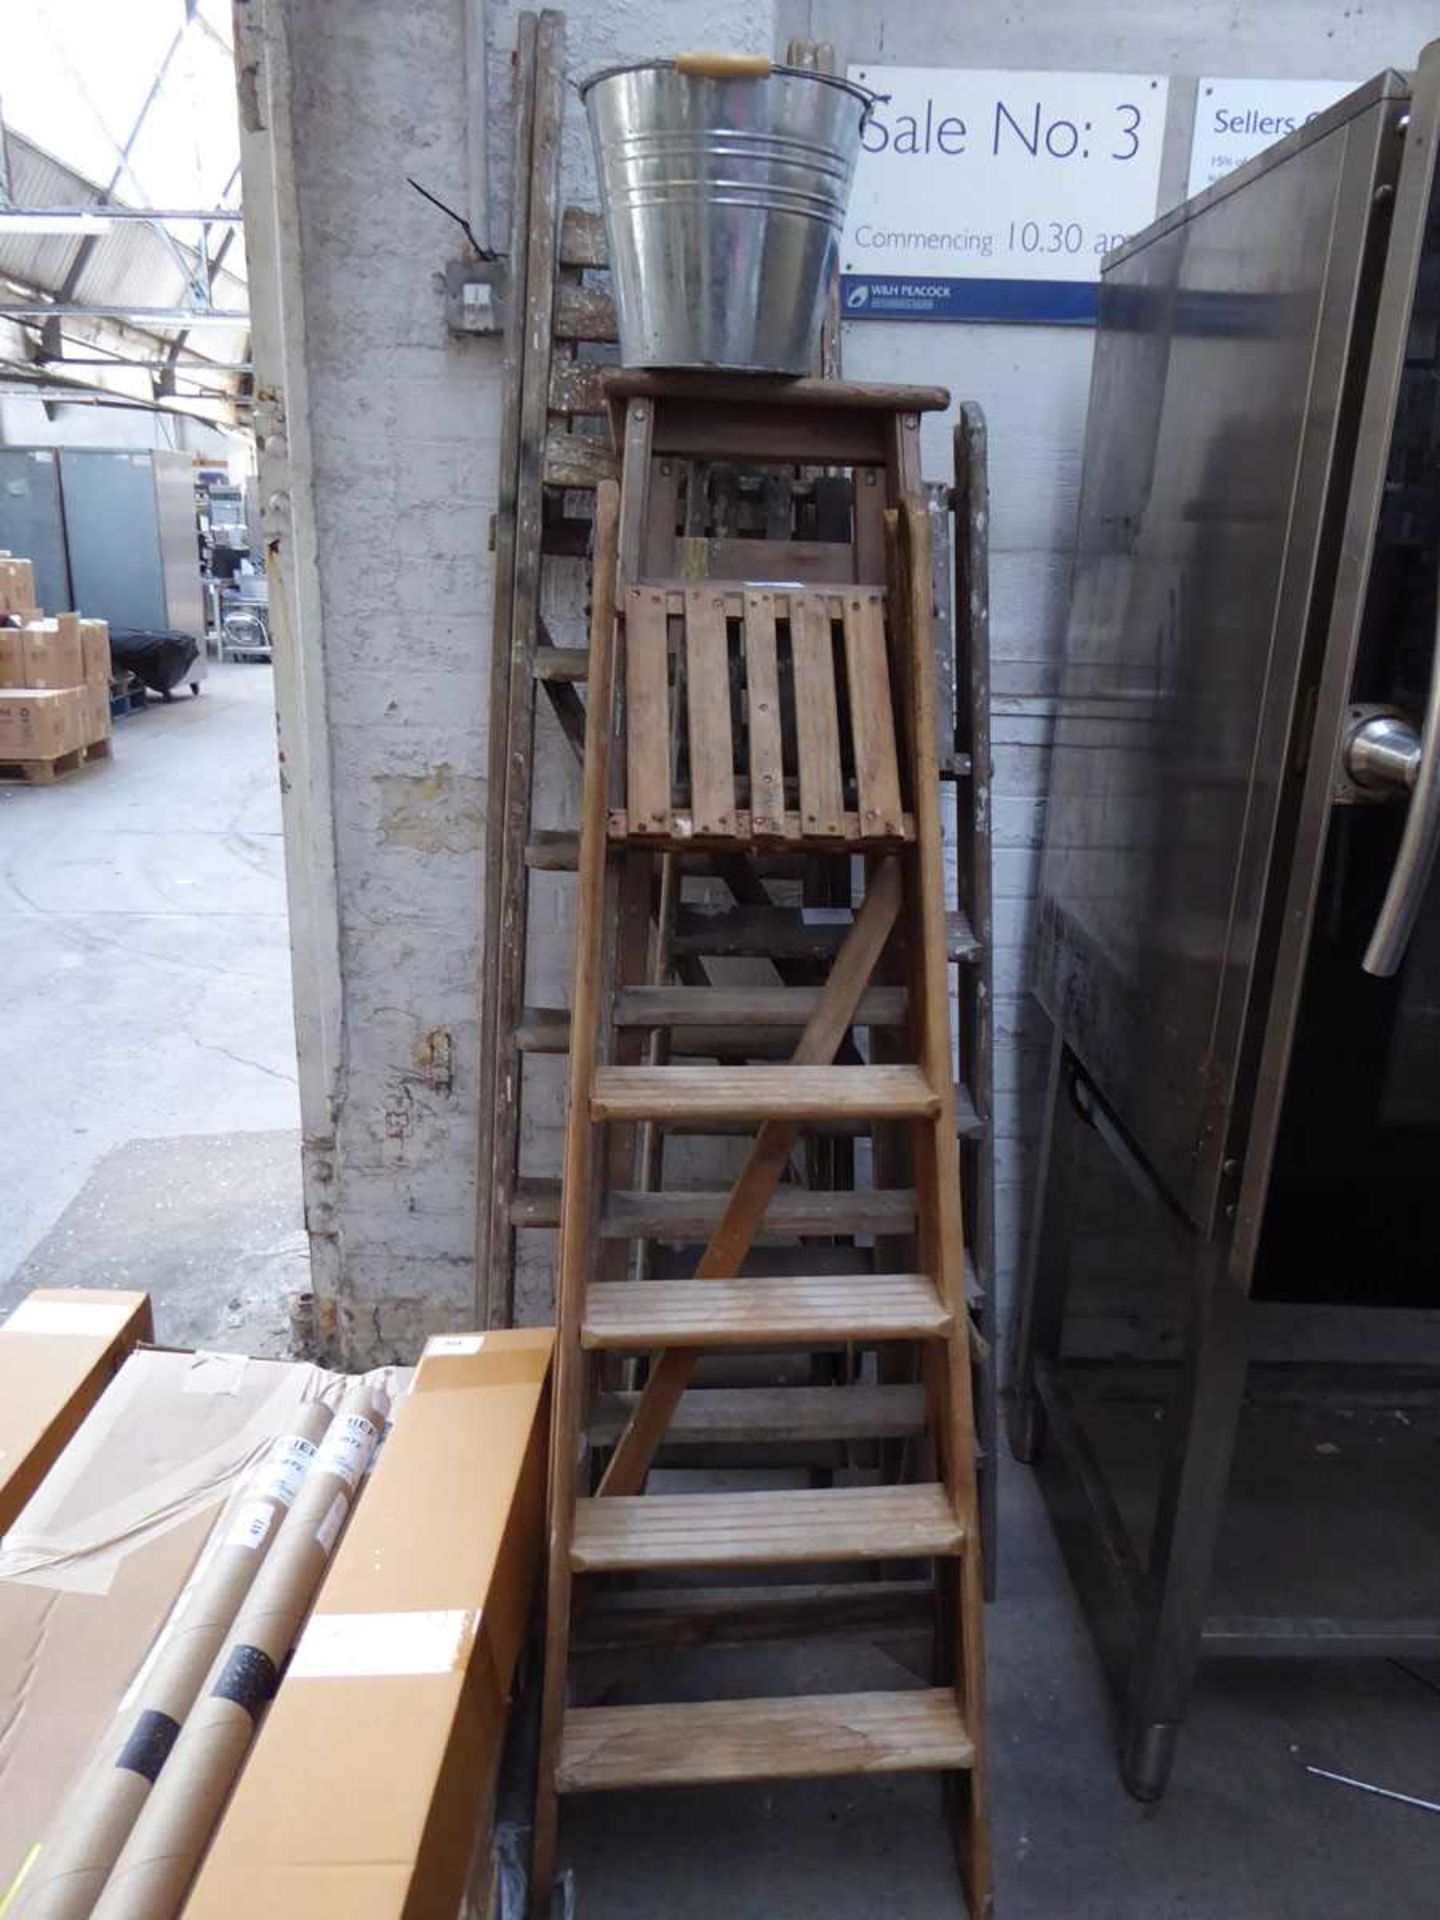 +VAT 4 wooden folding step ladders, used for decoration purposes